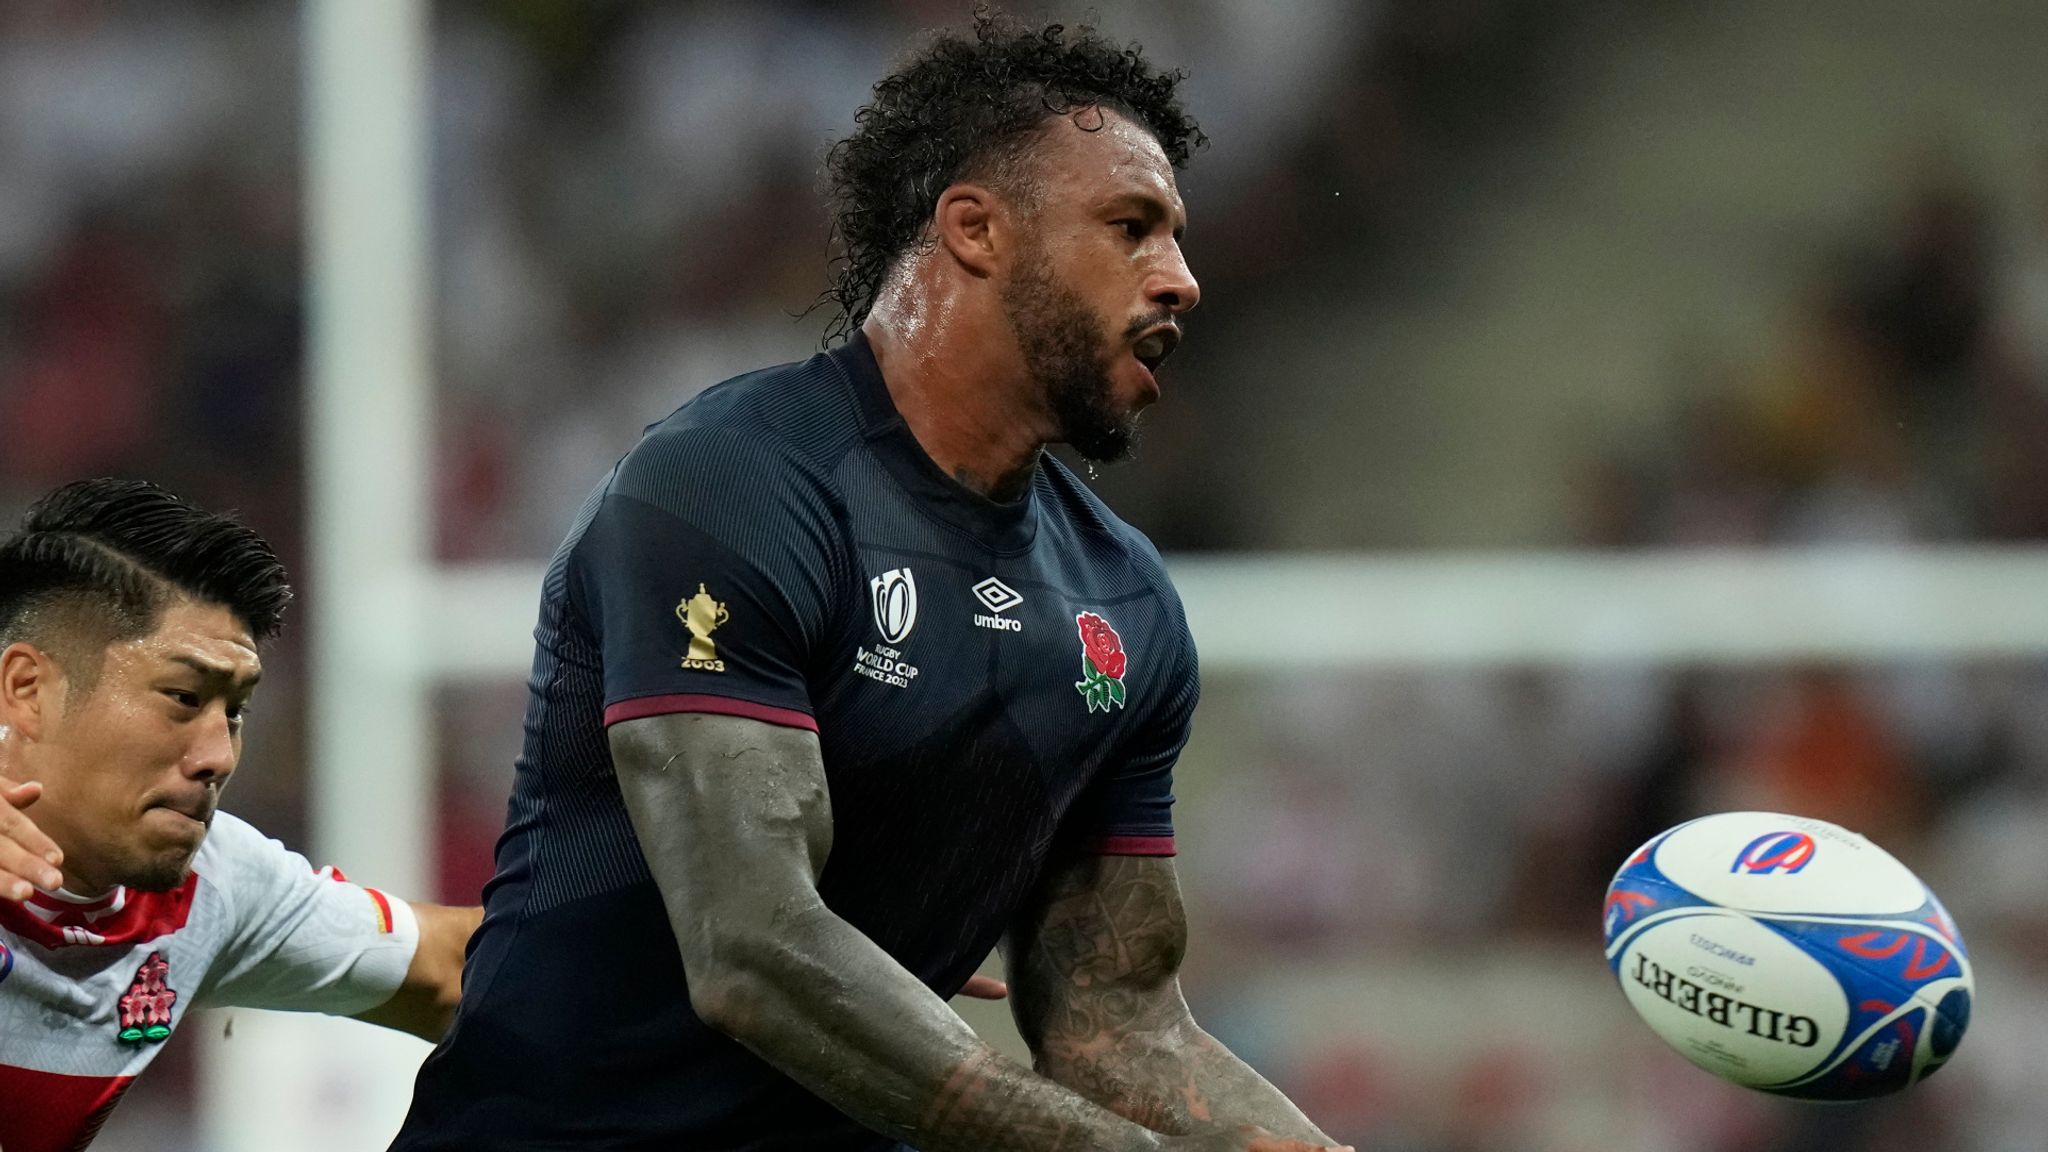 Courtney Lawes England getting better every day at Rugby World Cup after recording back-to-back wins Rugby Union News Sky Sports